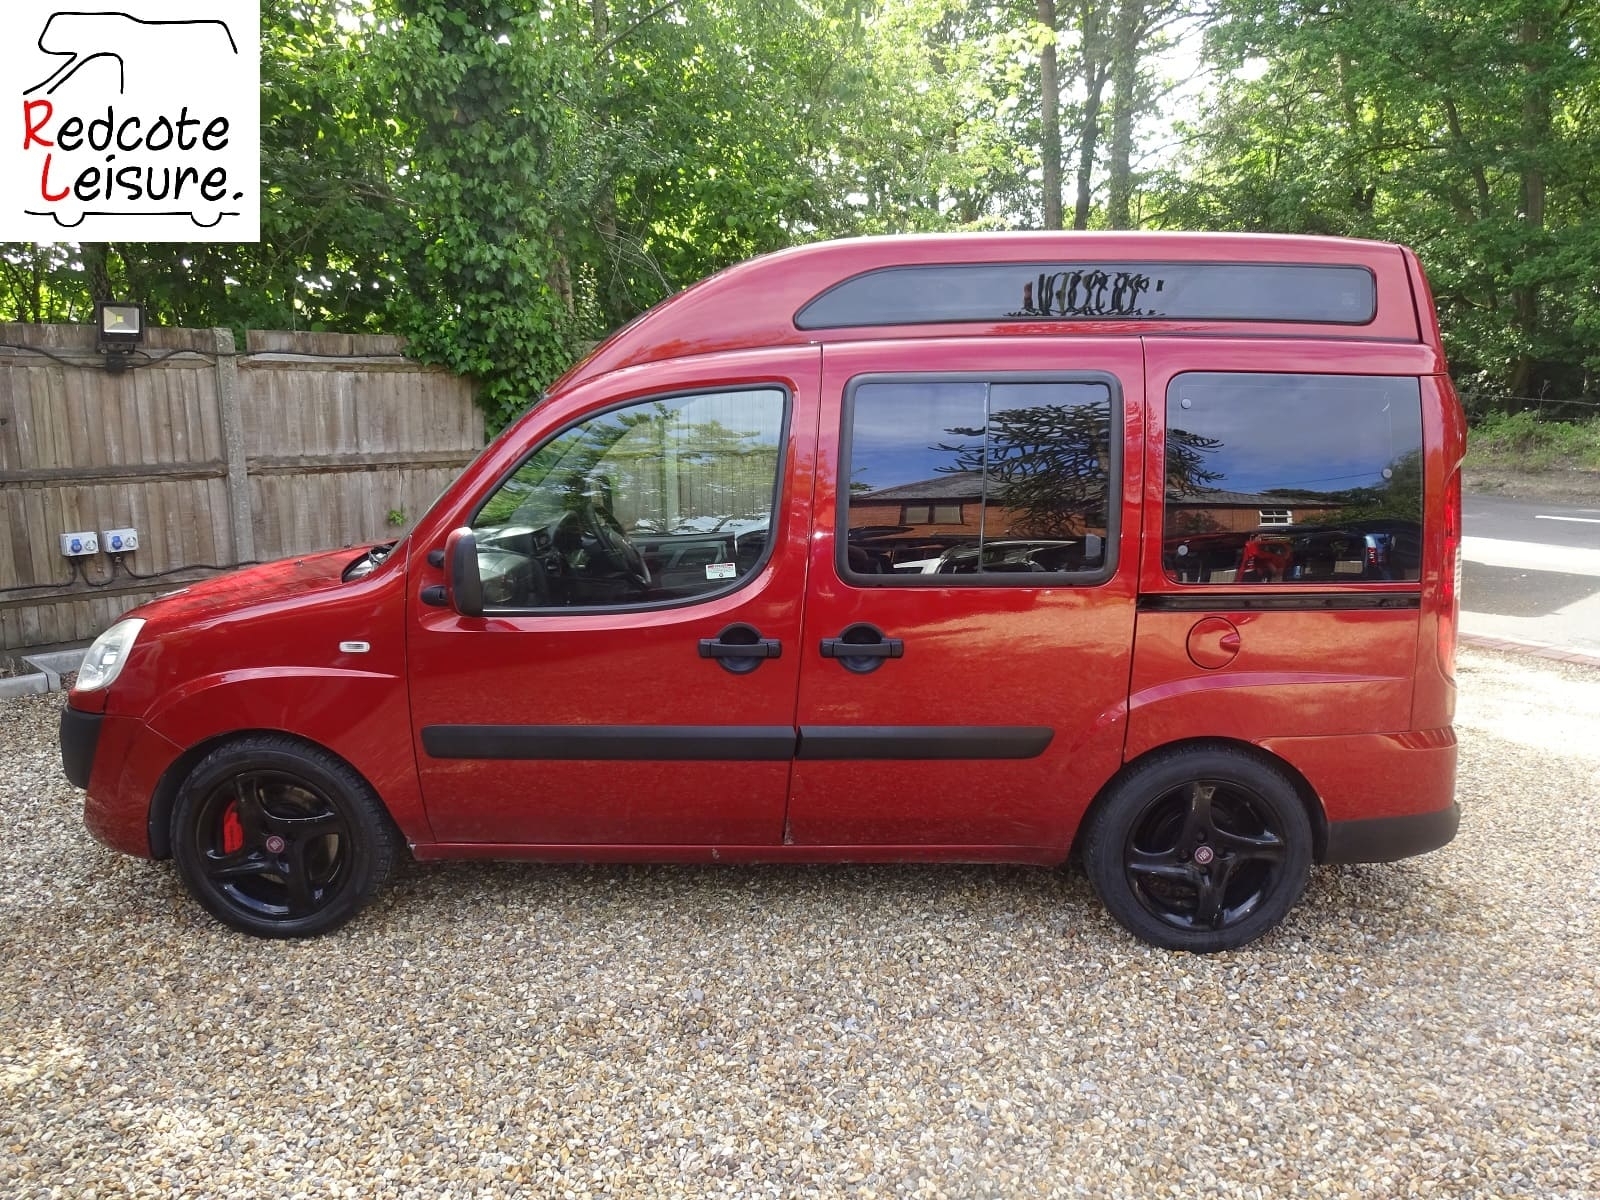 07 Fiat Doblo Dynamic High Top Micro Camper Worlds Fastest Motorhome For Sale Redcote Leisure